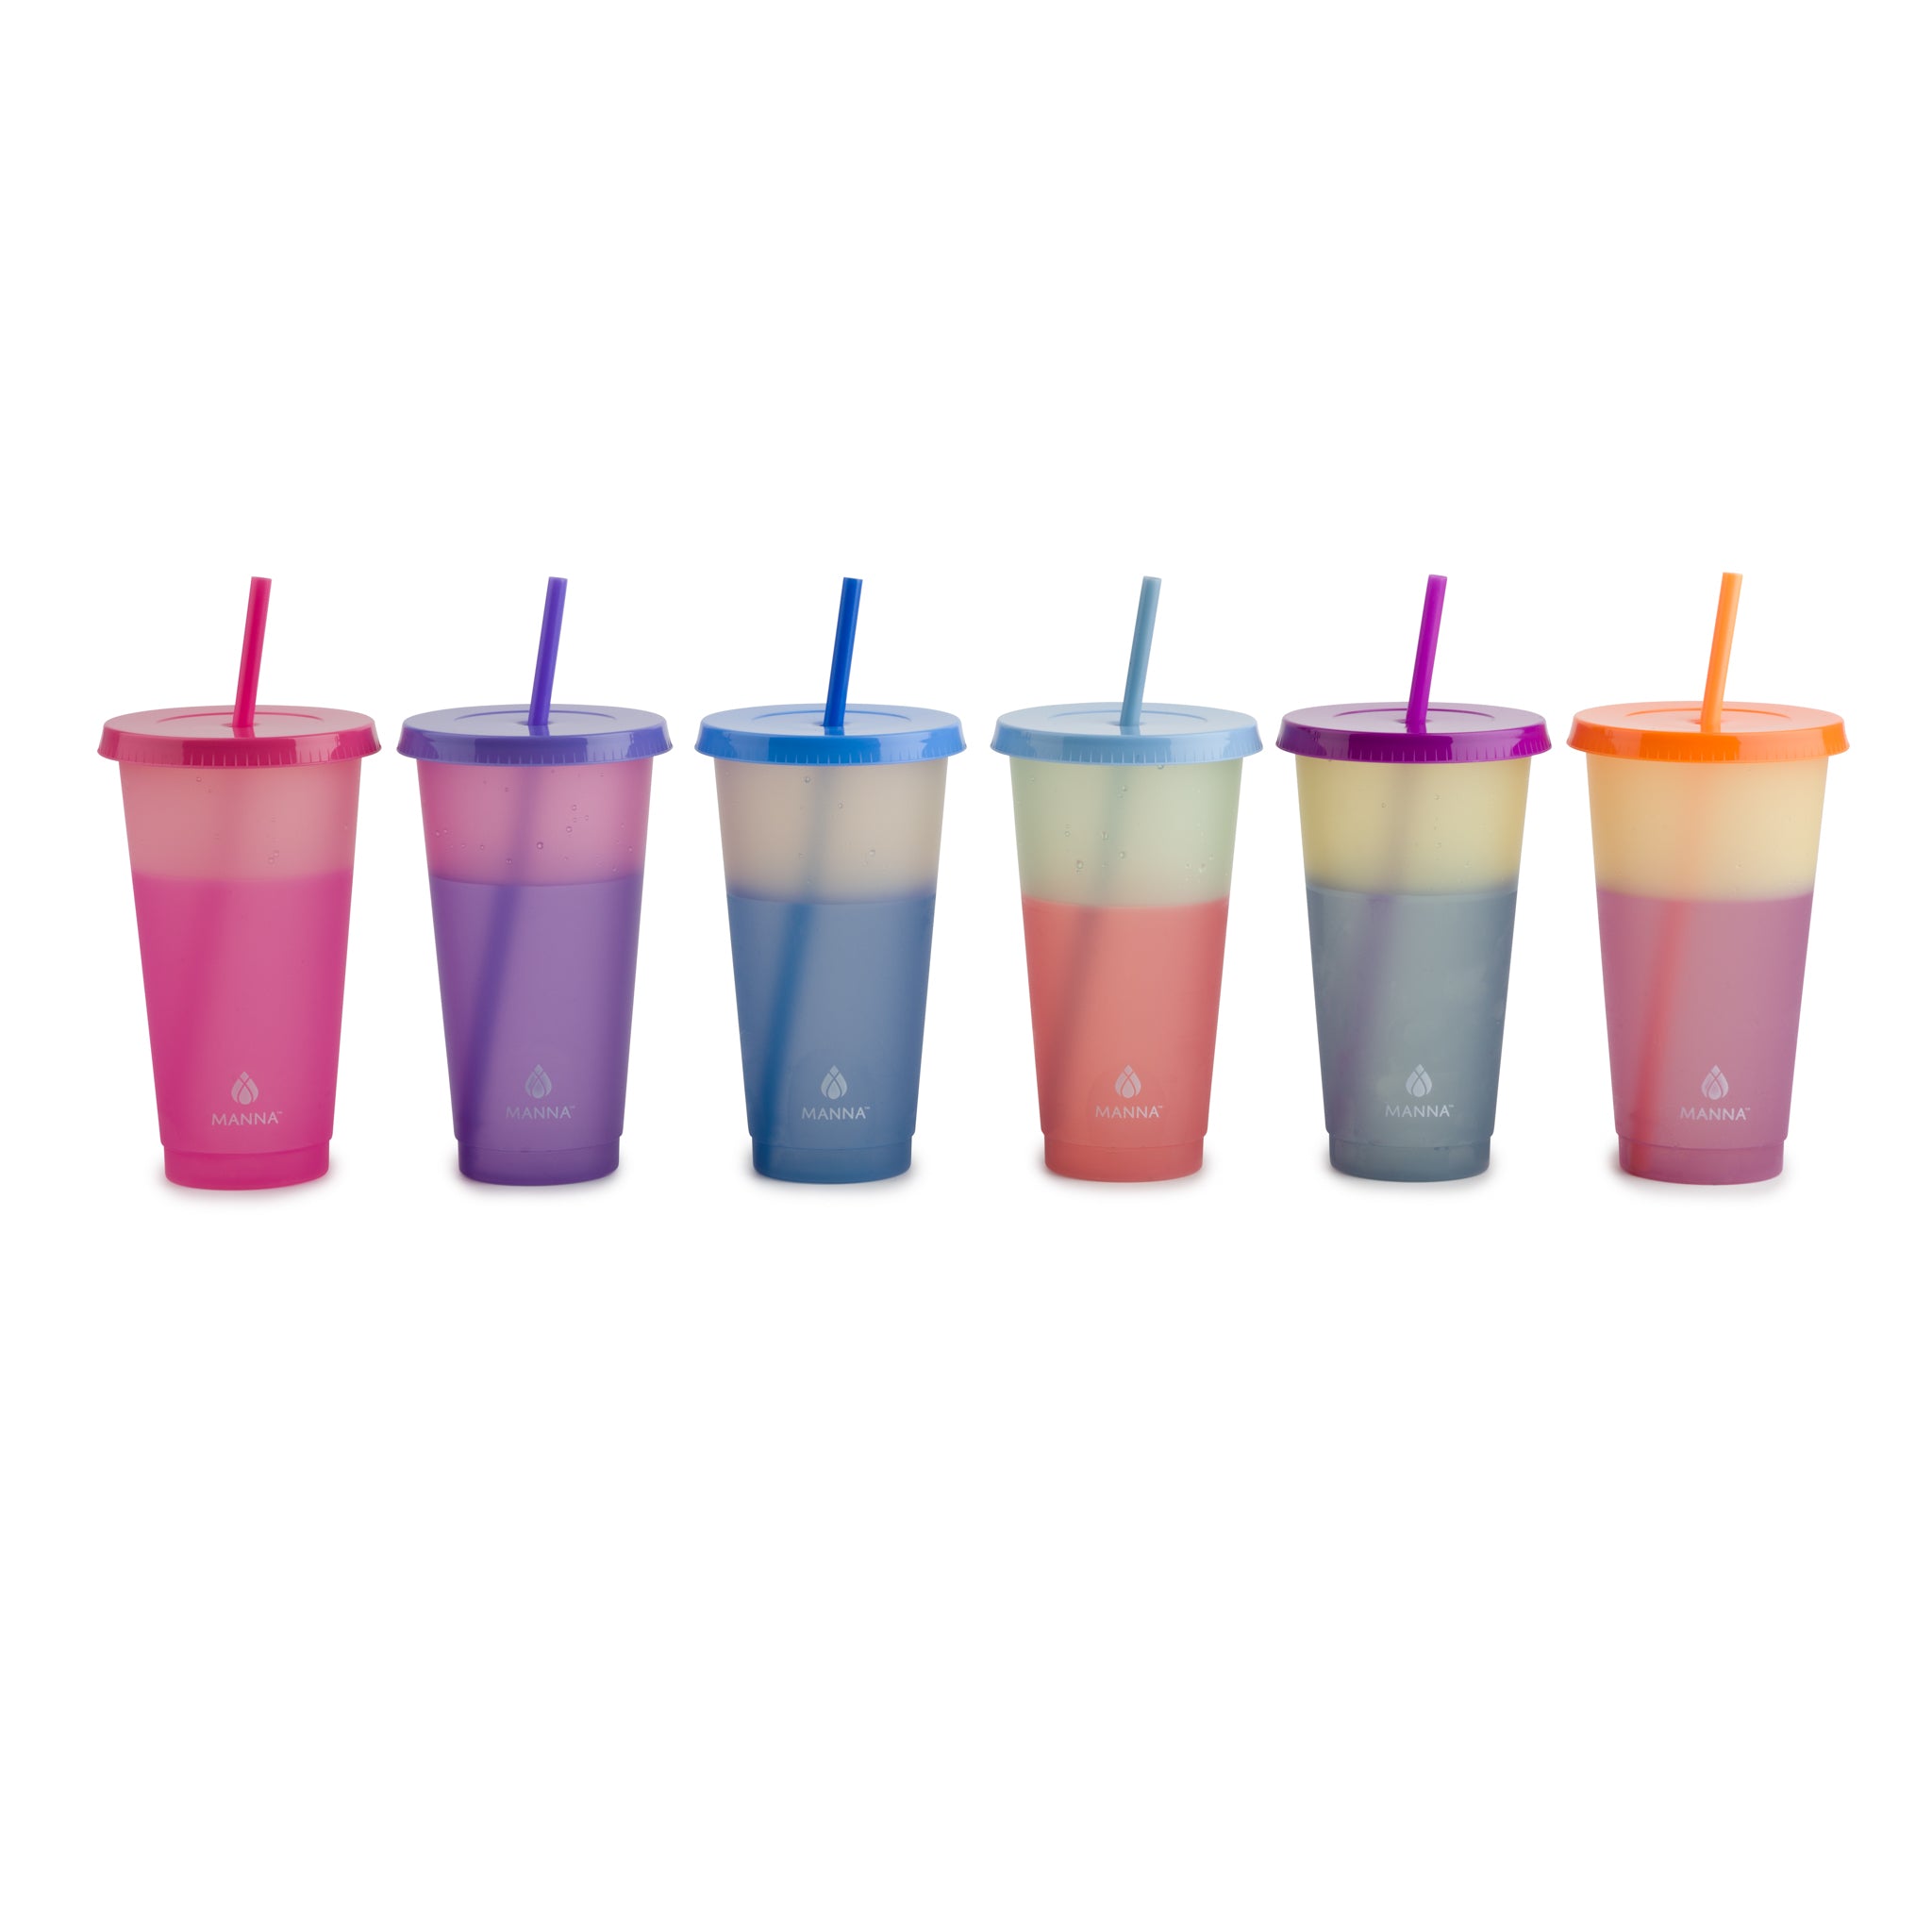 Personalized Tal Color Changing Tumblers 20oz Cold Cups & Lids